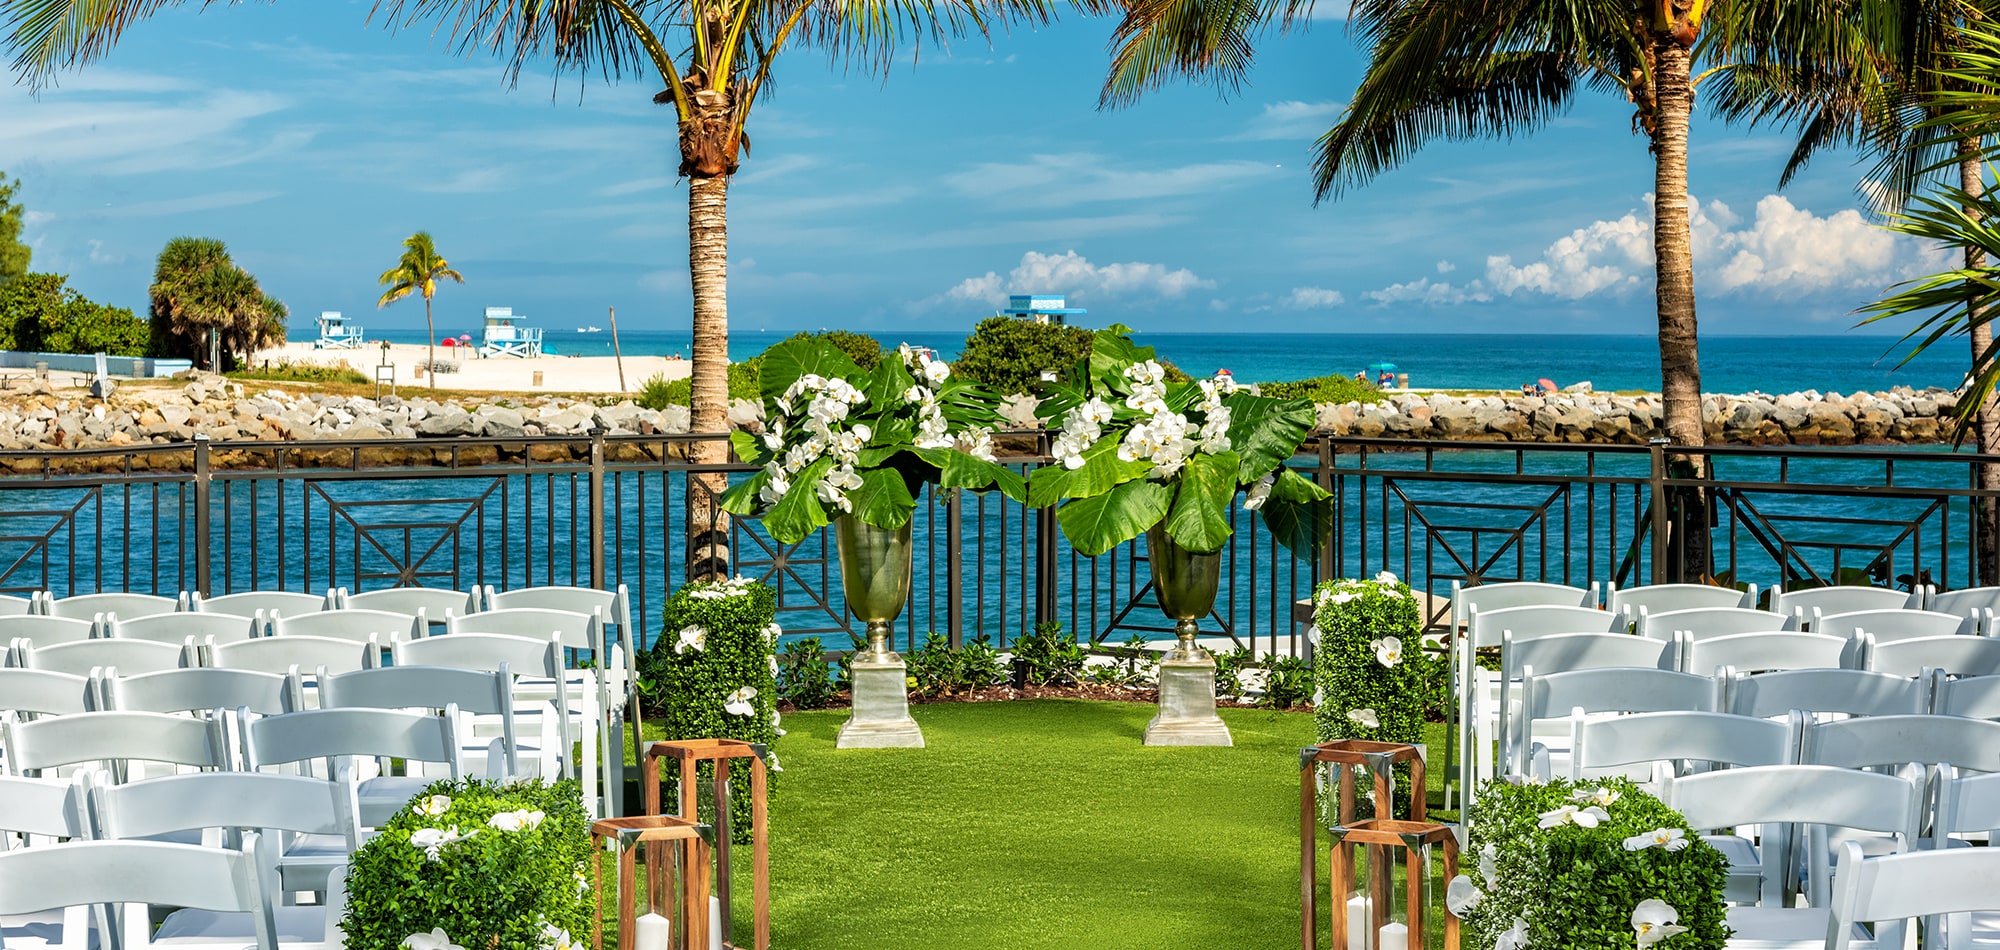 An outside setting for a wedding